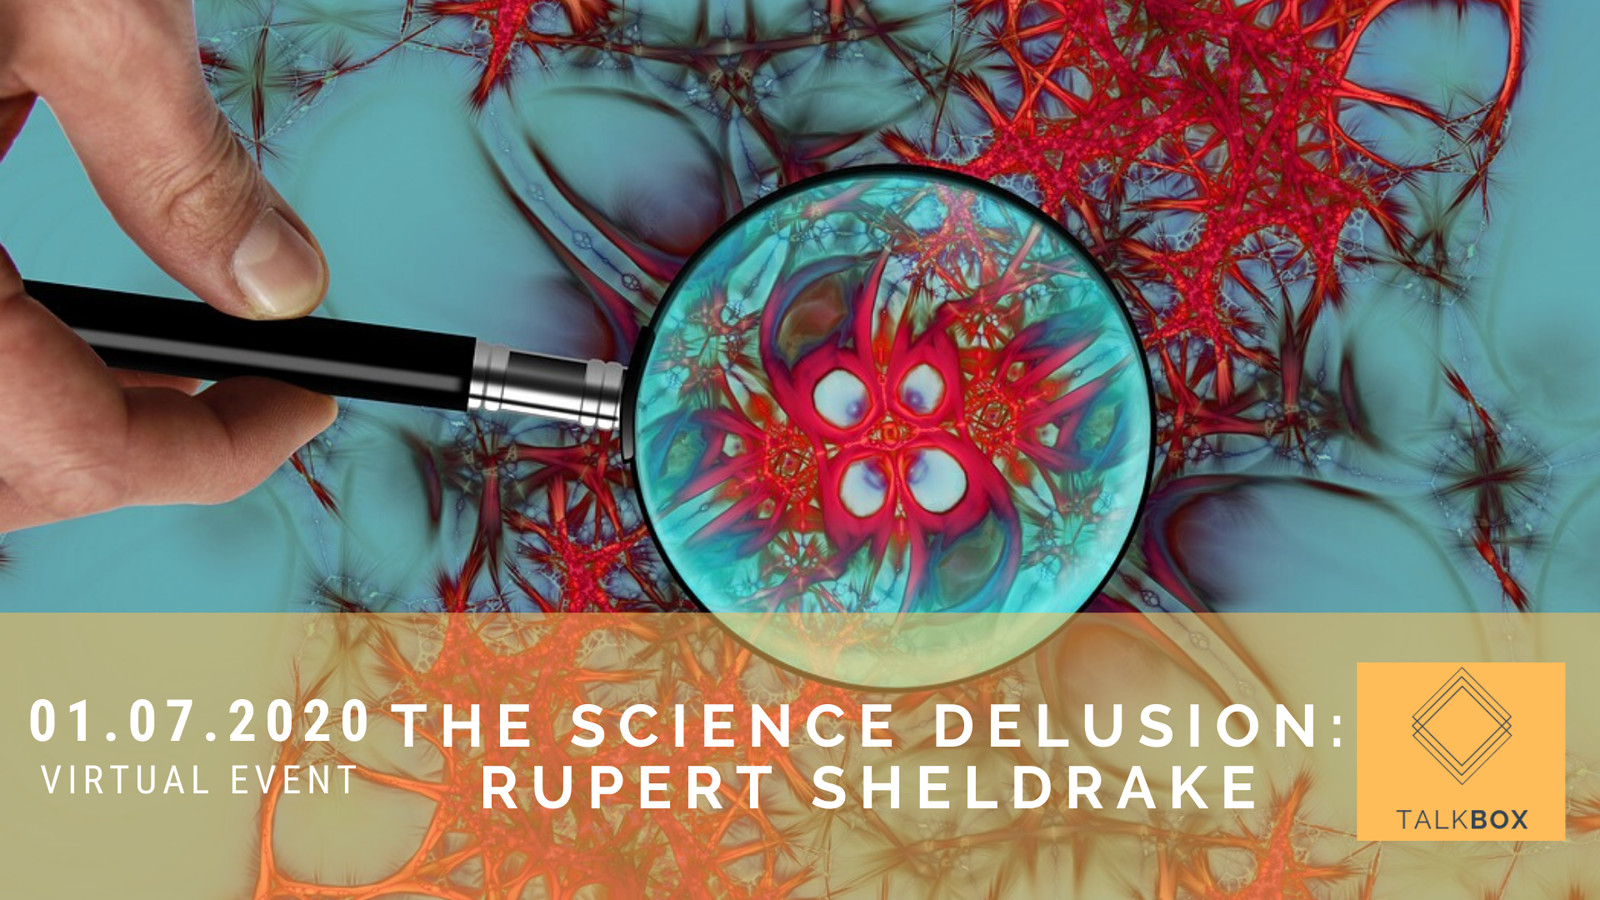 The Science Delusion by Rupert Sheldrake at Virtual Event